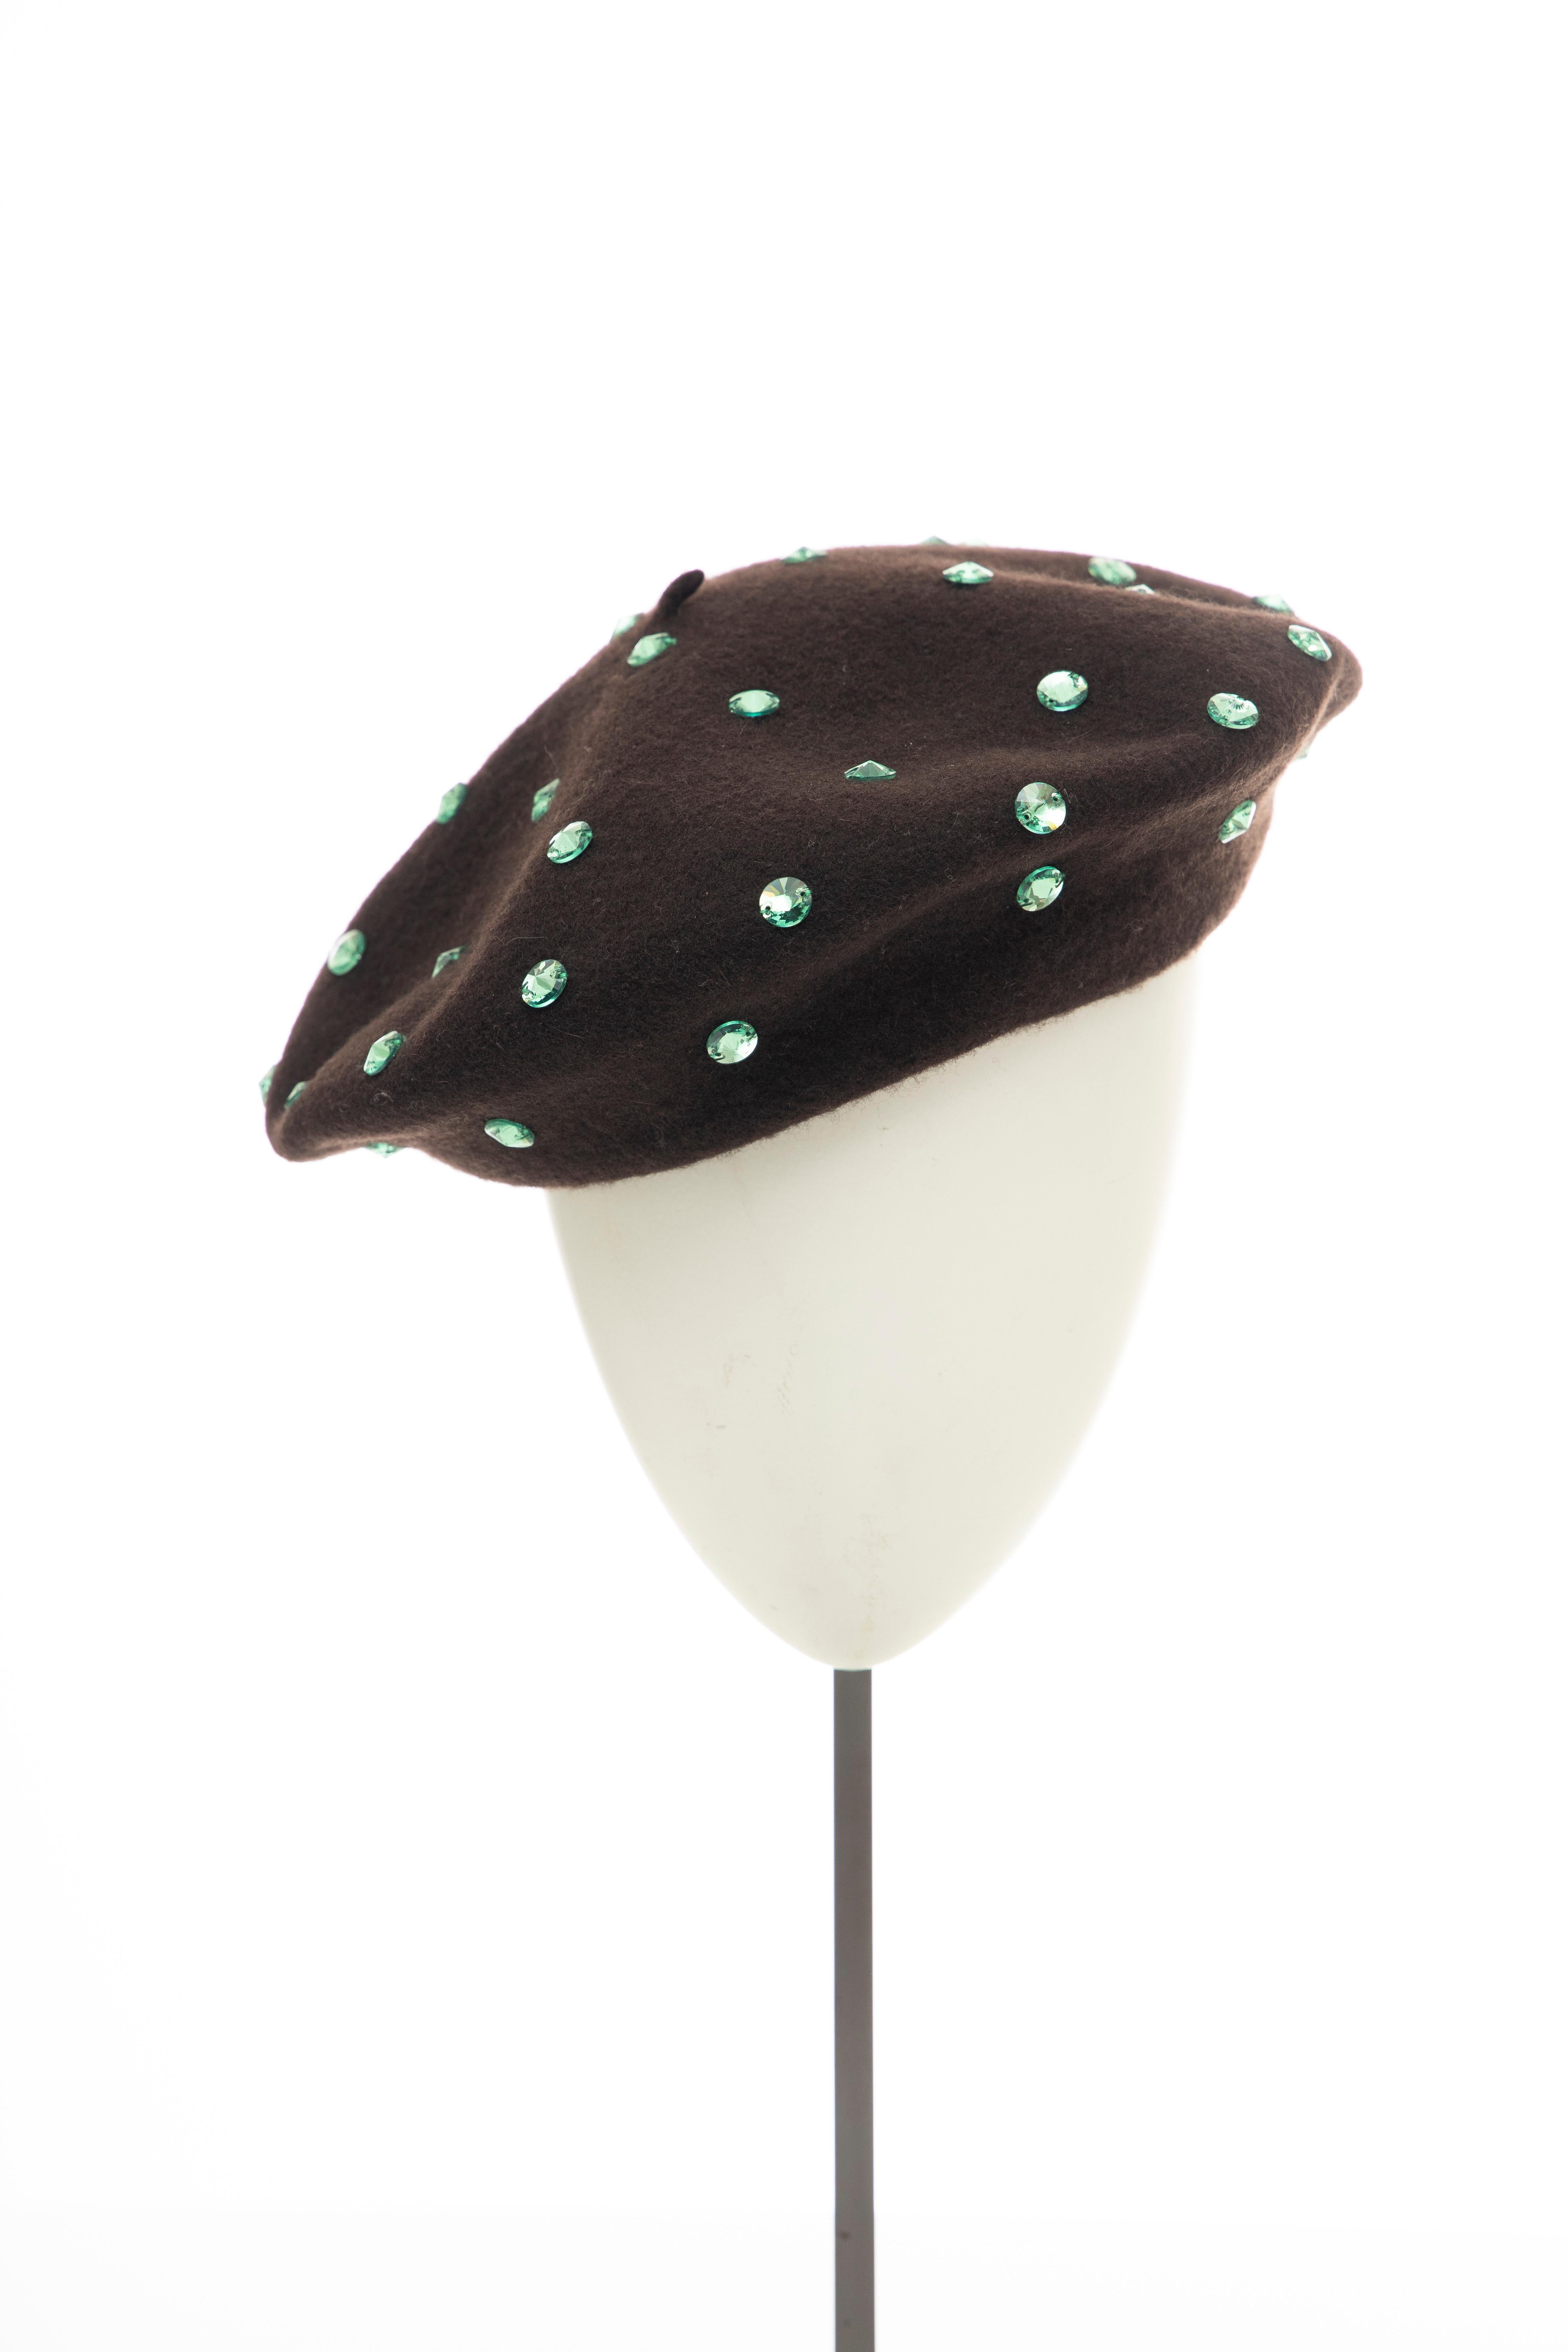 Dolce & Gabbana Wool Chocolate Brown Turquoise Cut Crystals Beret, Fall 2000 5